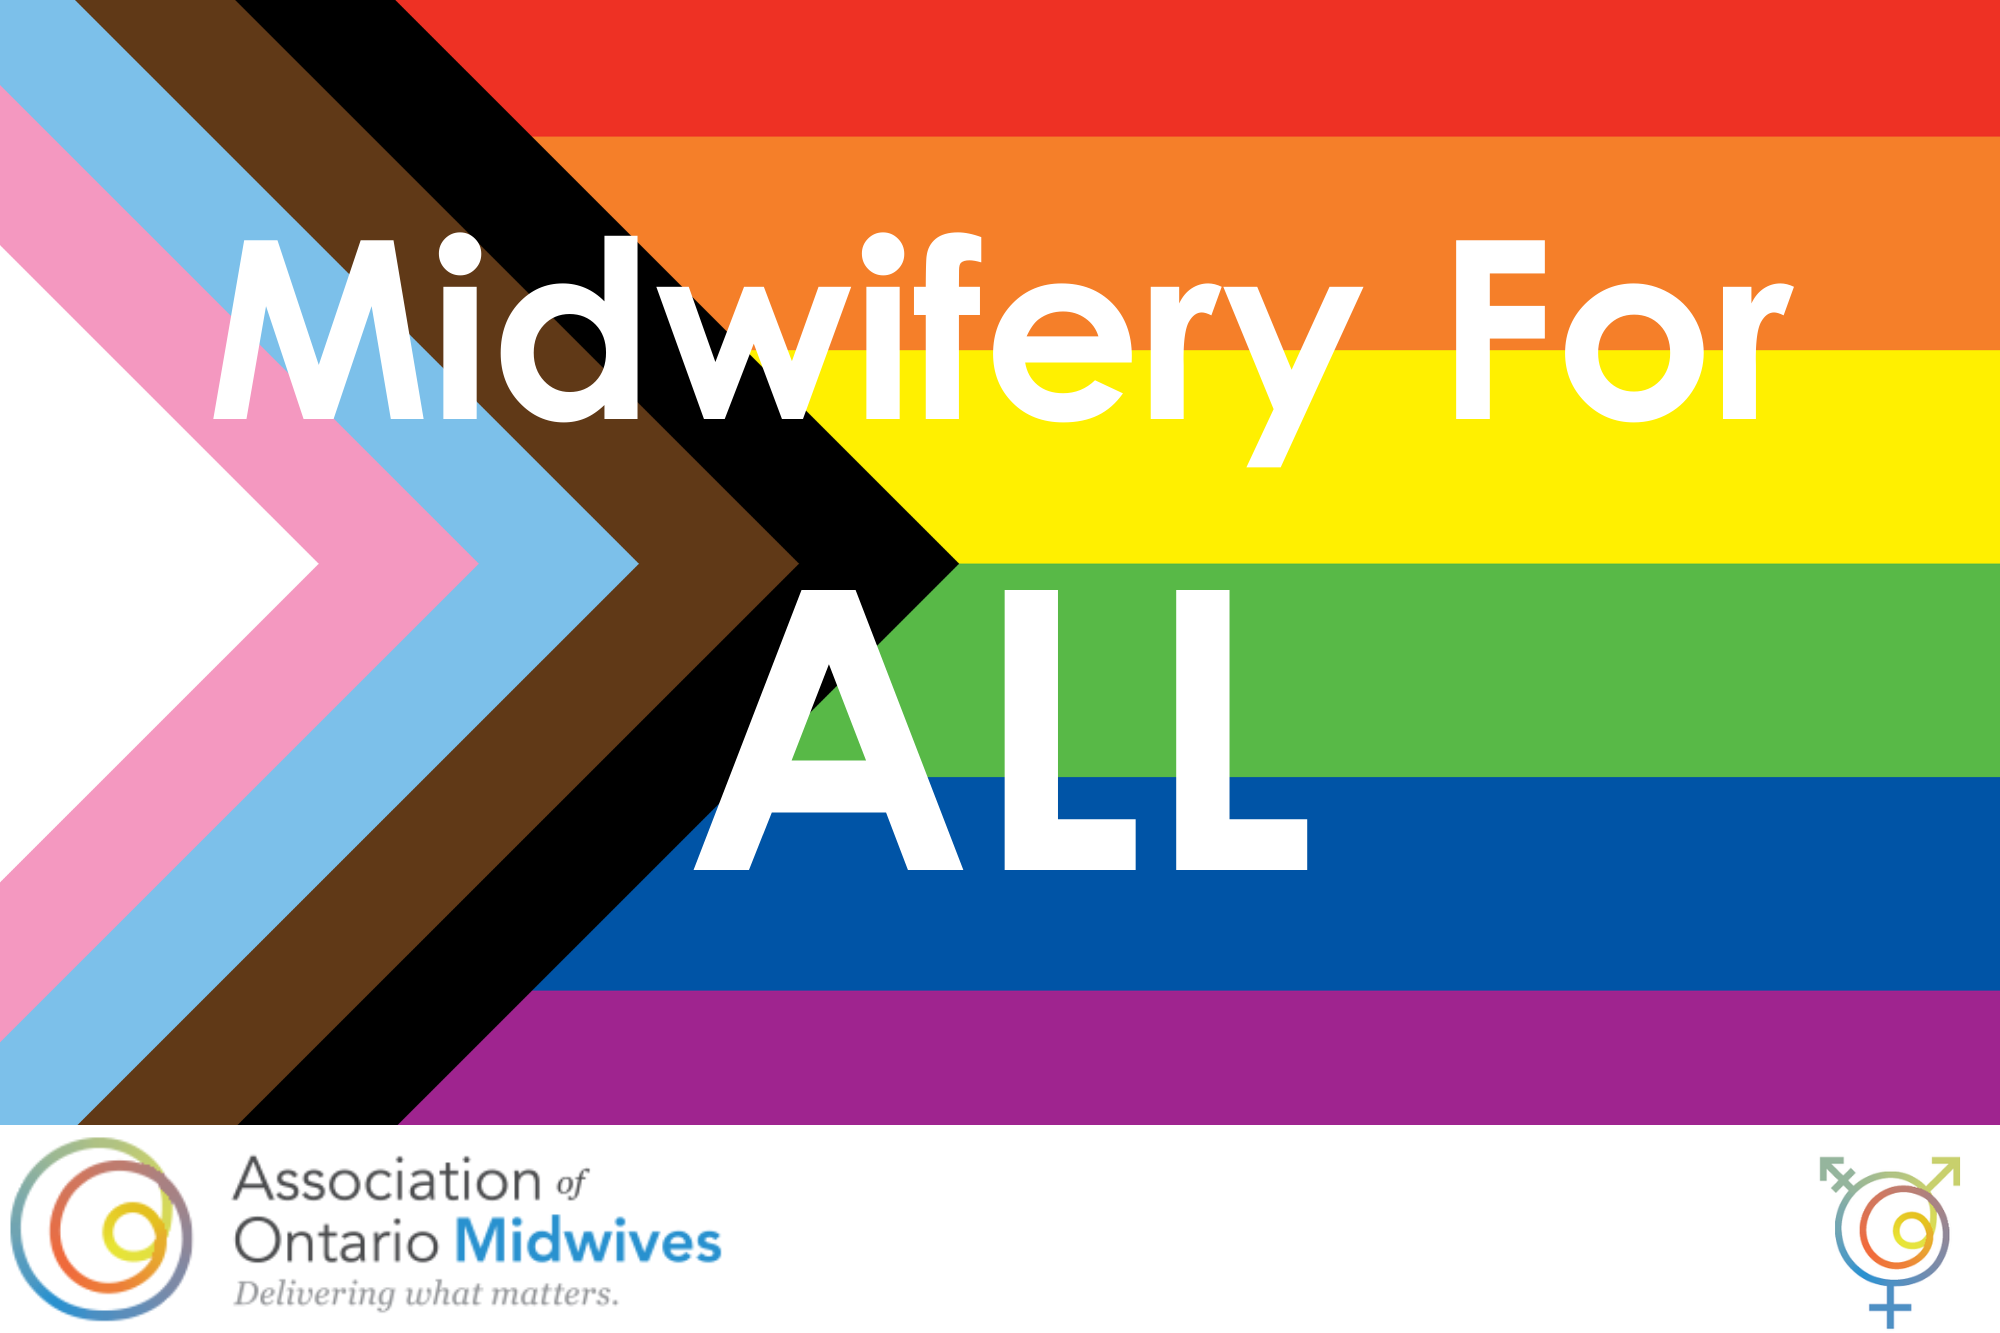 Progress Pride flag with text "Midwifery For ALL" and AOM logo